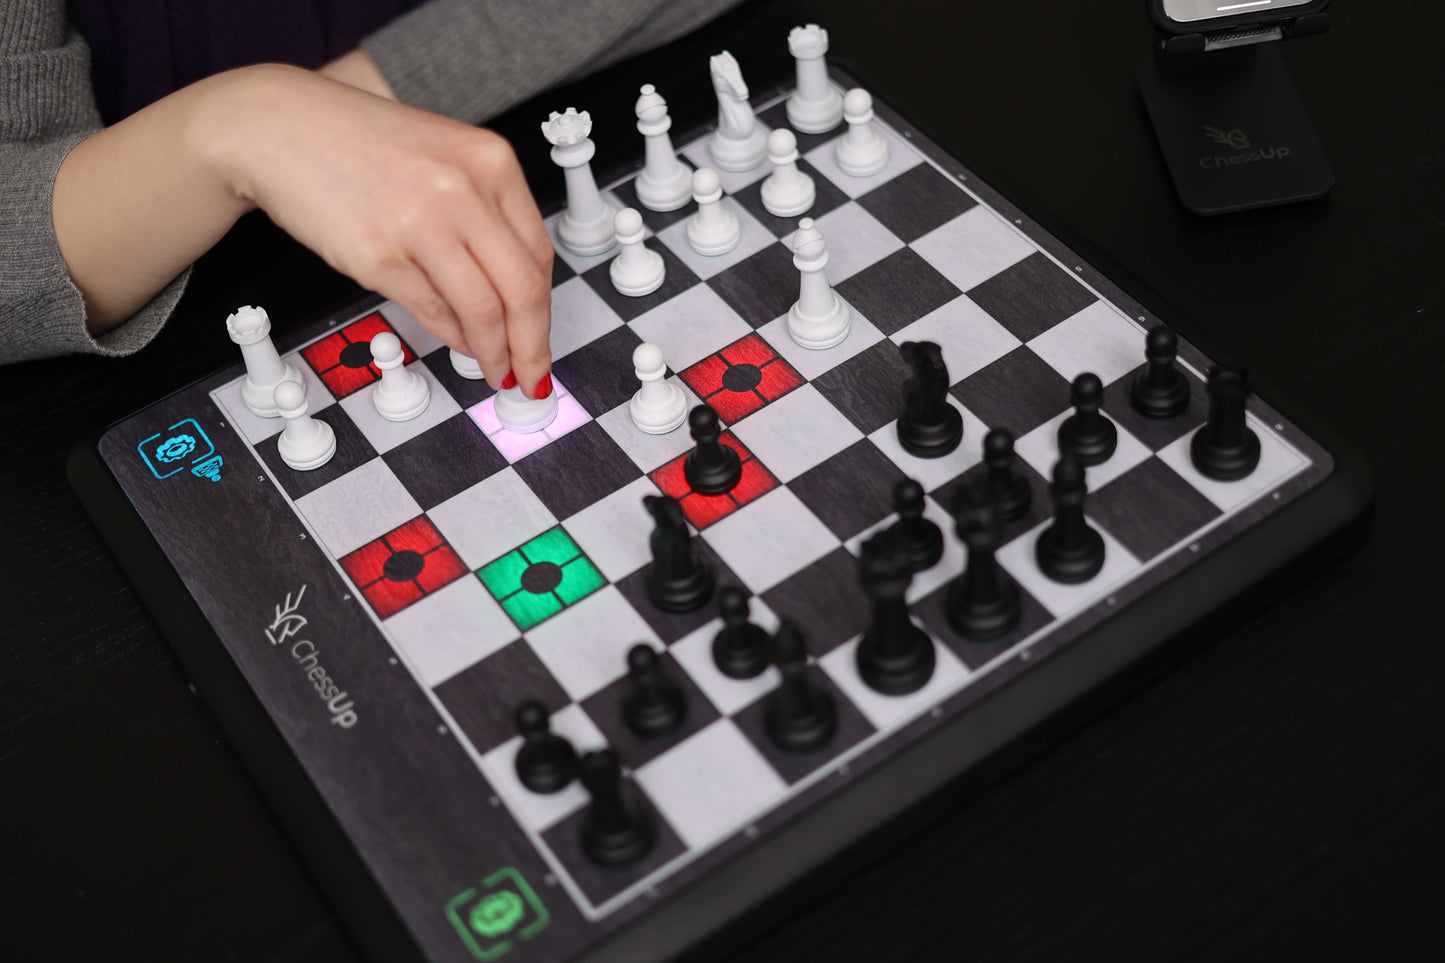 ChessUp on Shark Tank: Cost, where to buy, founders and more about  electronic chess business